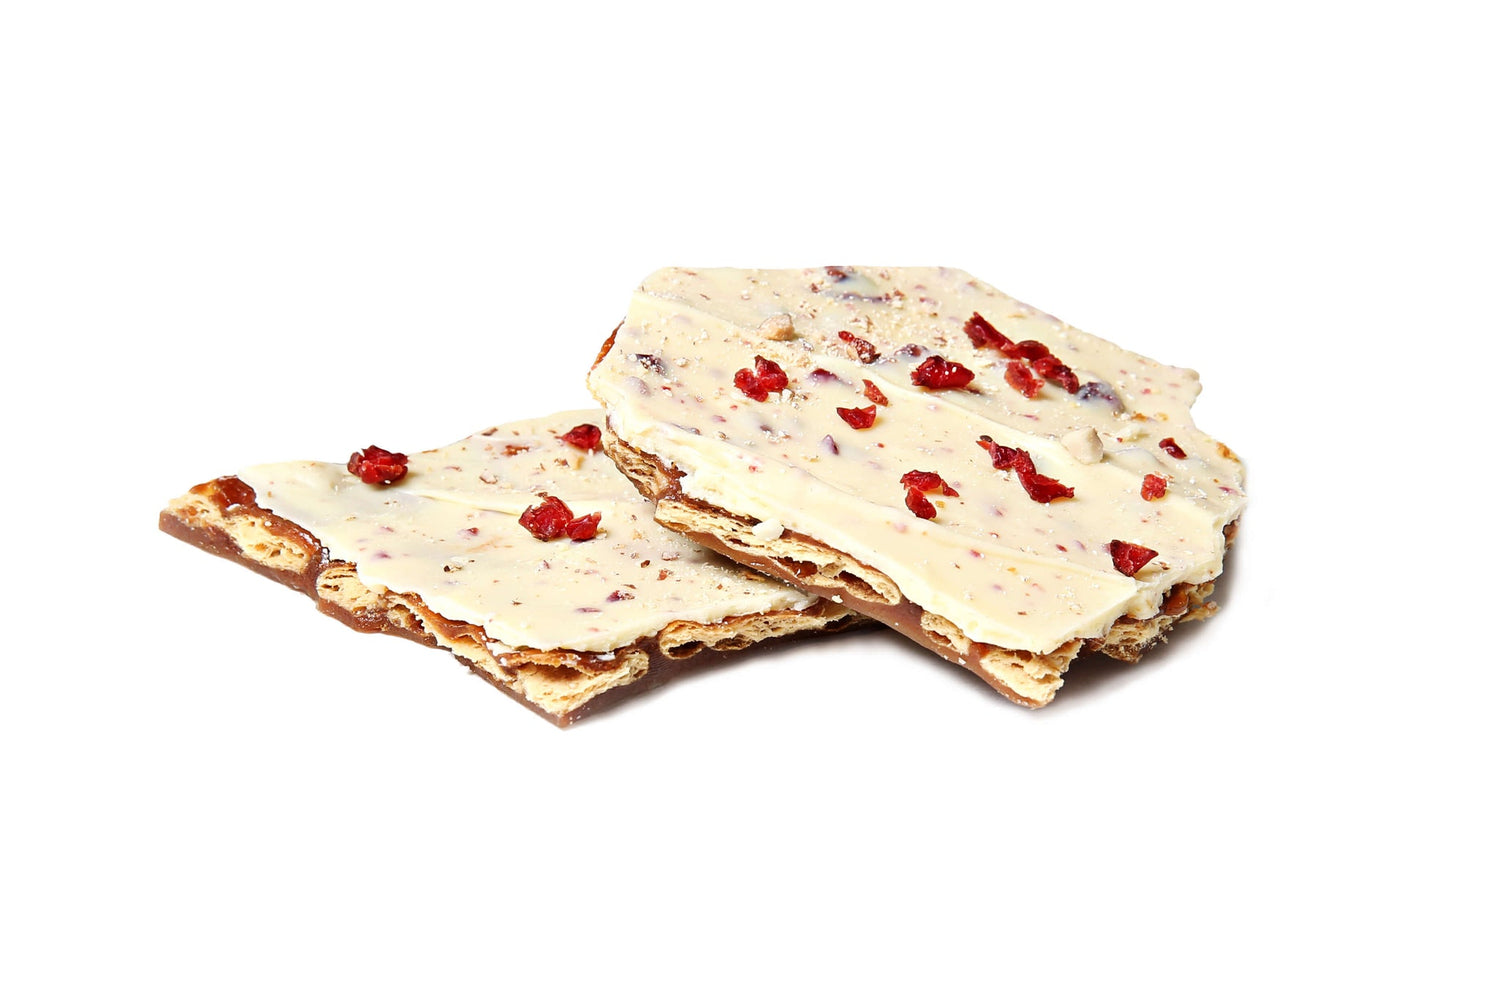 Christy's Gourmet - White Chocolate Toffee Crunch 180g